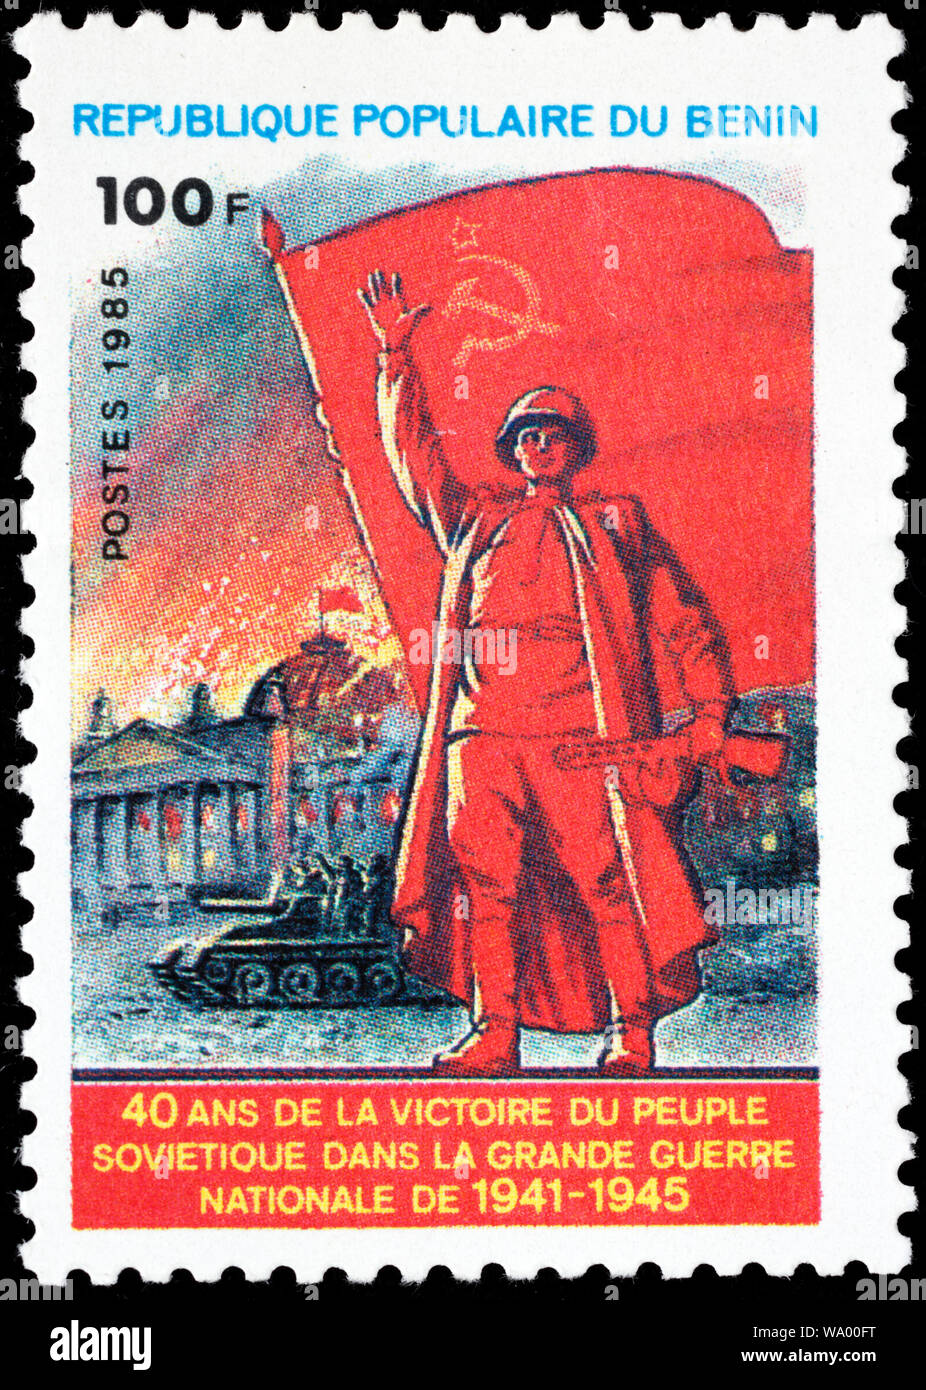 40 years of victory over Nazi Germany, postage stamp, Benin, 1985 Stock Photo